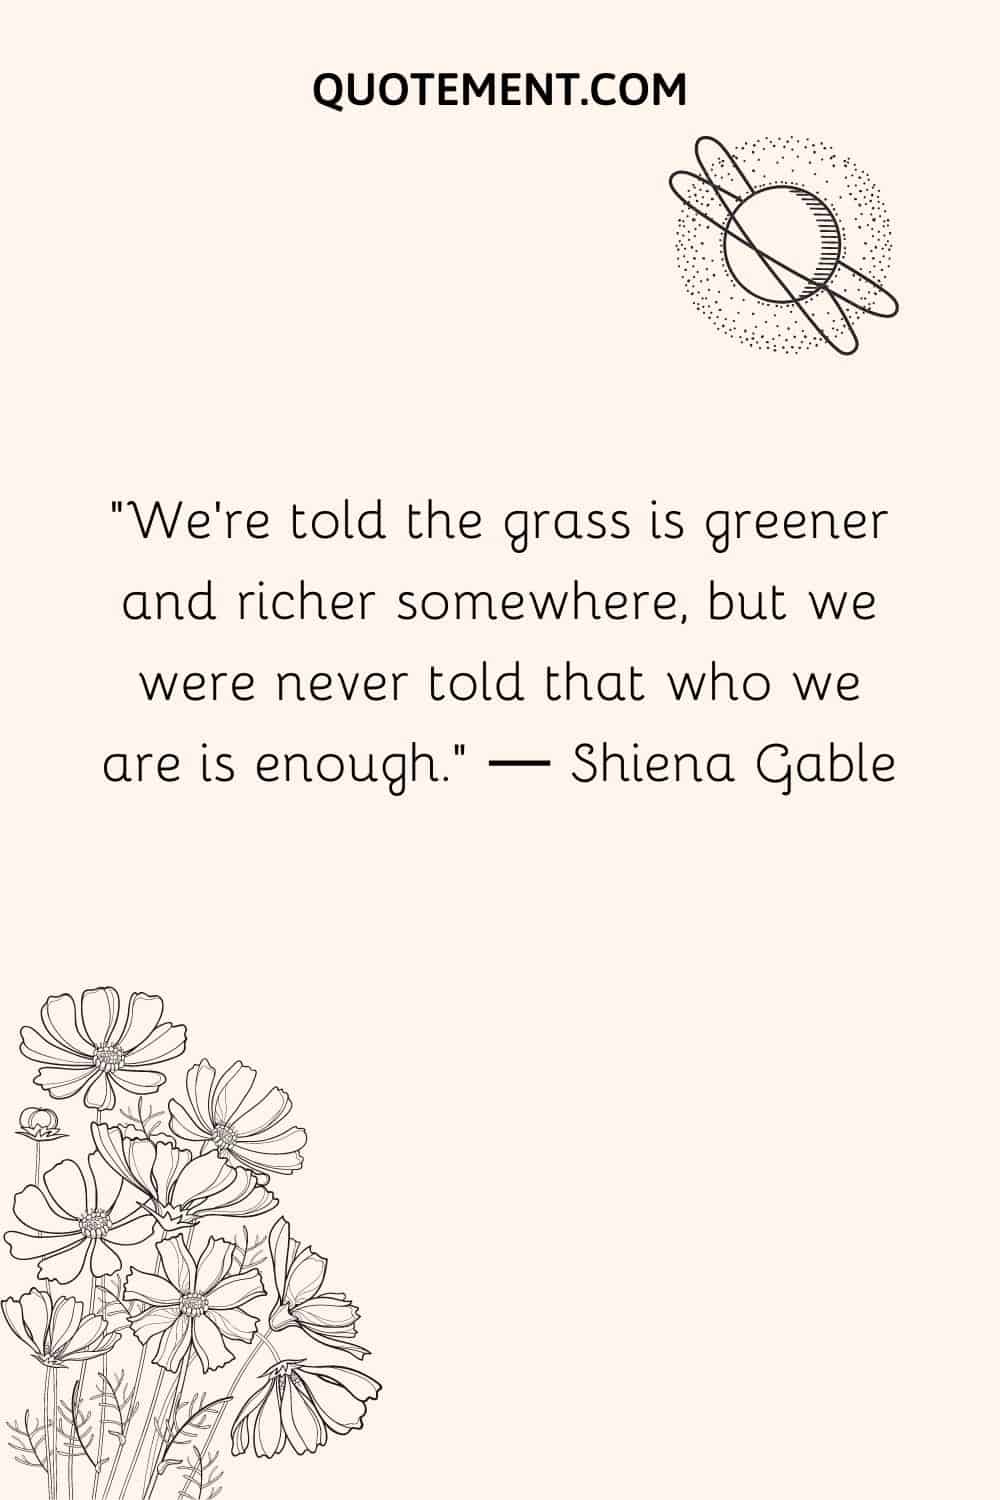 We're told the grass is greener and richer somewhere, but we were never told that who we are is enough